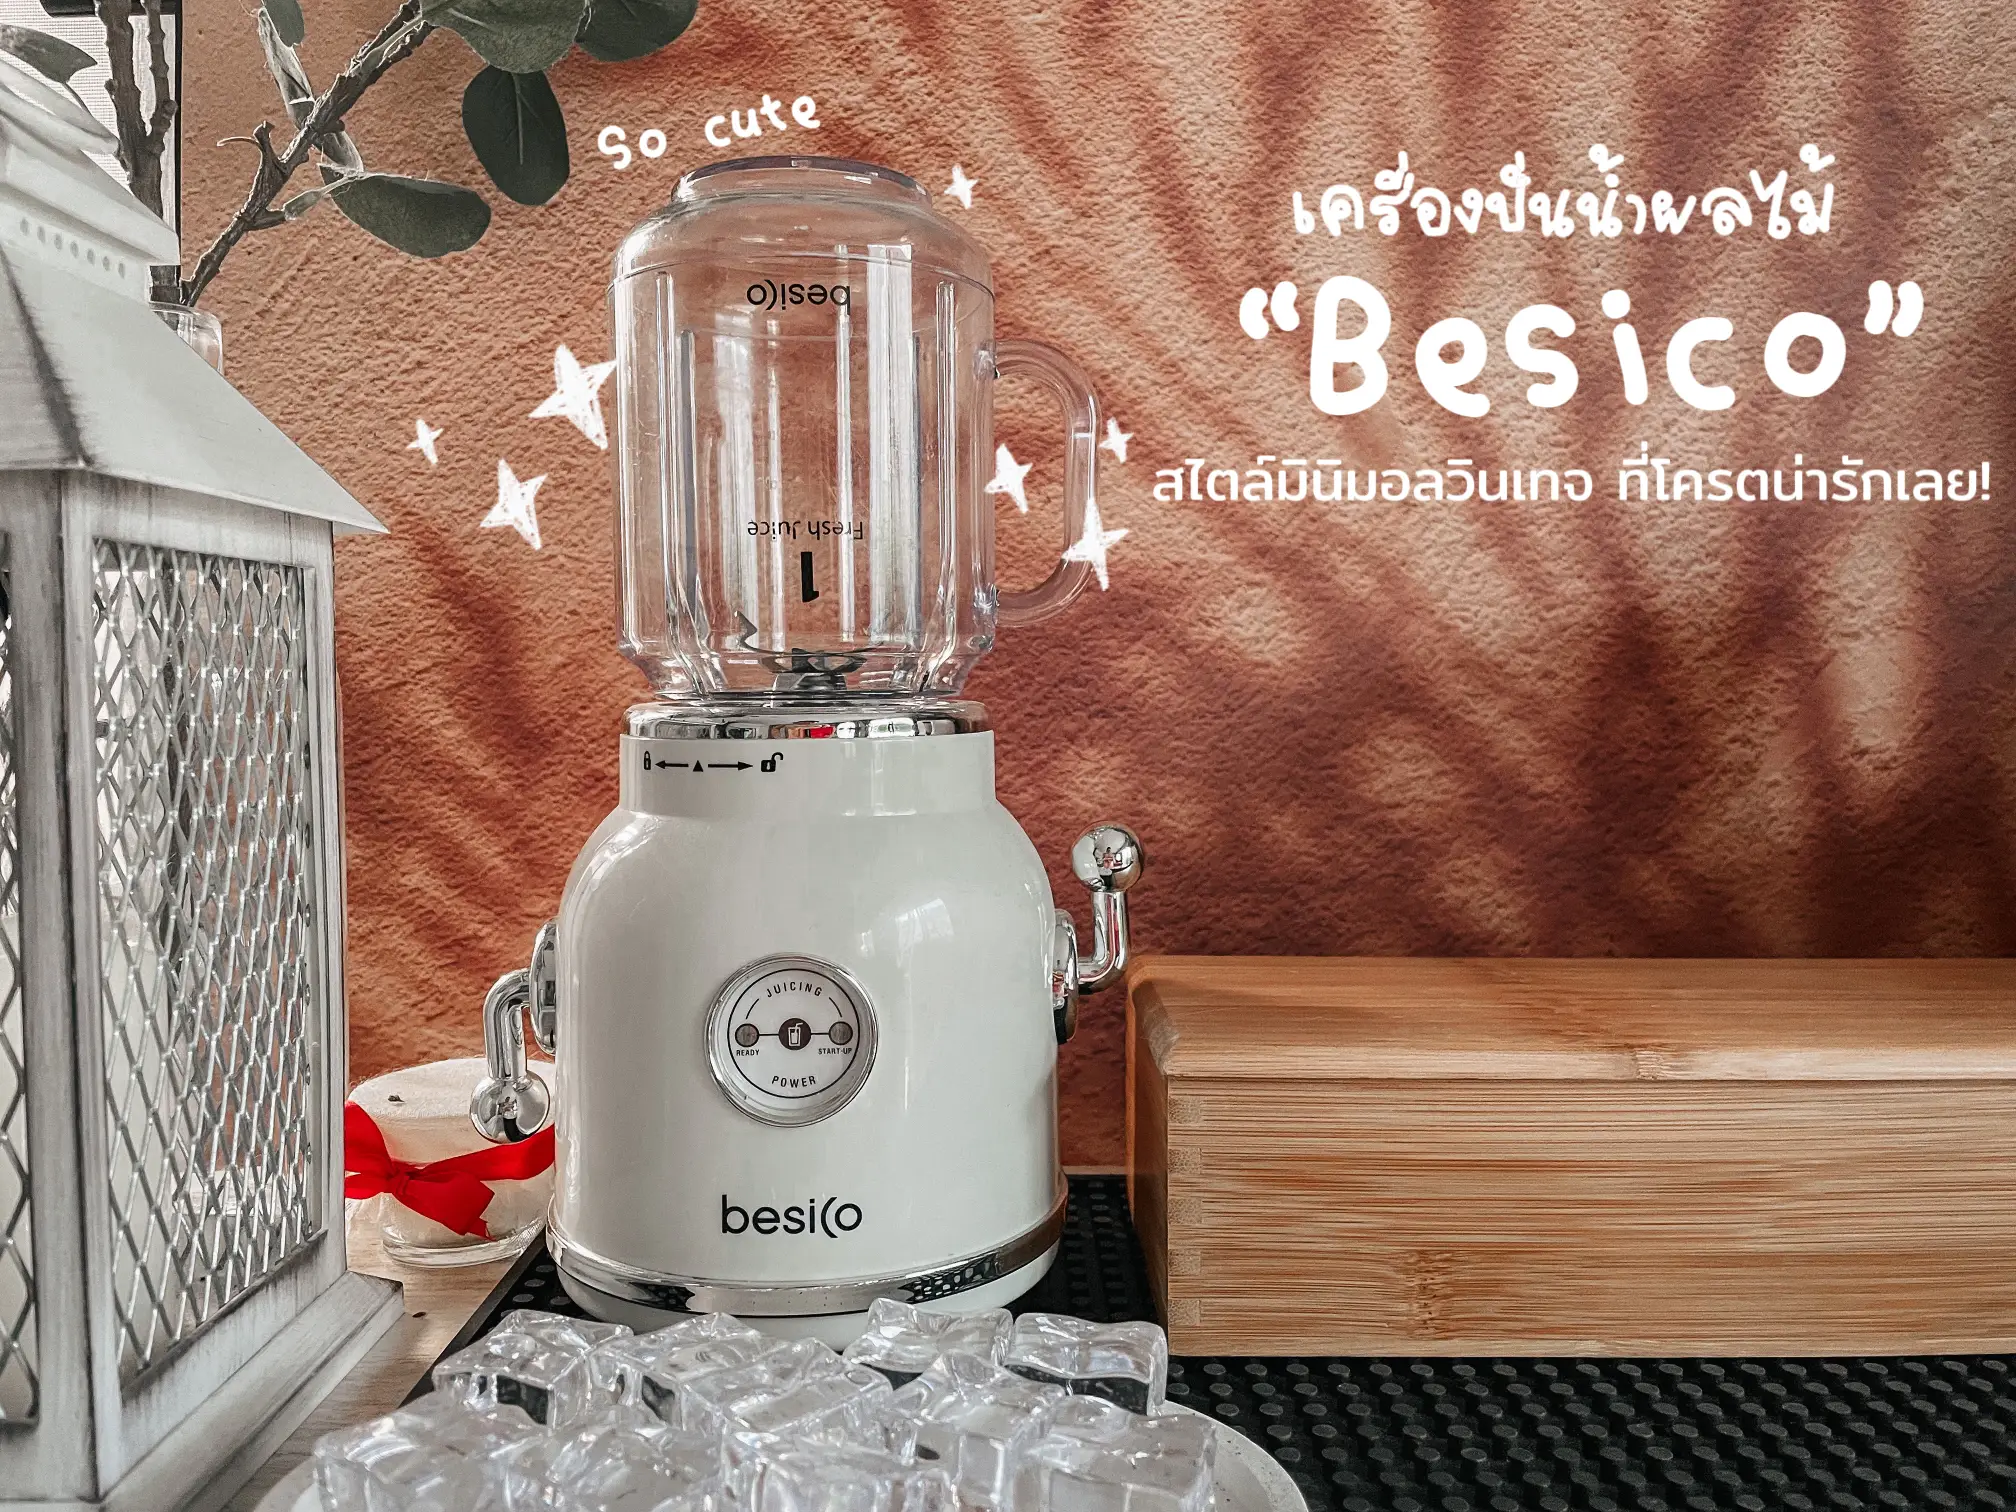 Besico Vintage Minimalist Style Blender. At Home Decor Cord Not To Be  Missed!, Gallery posted by Wariya.H